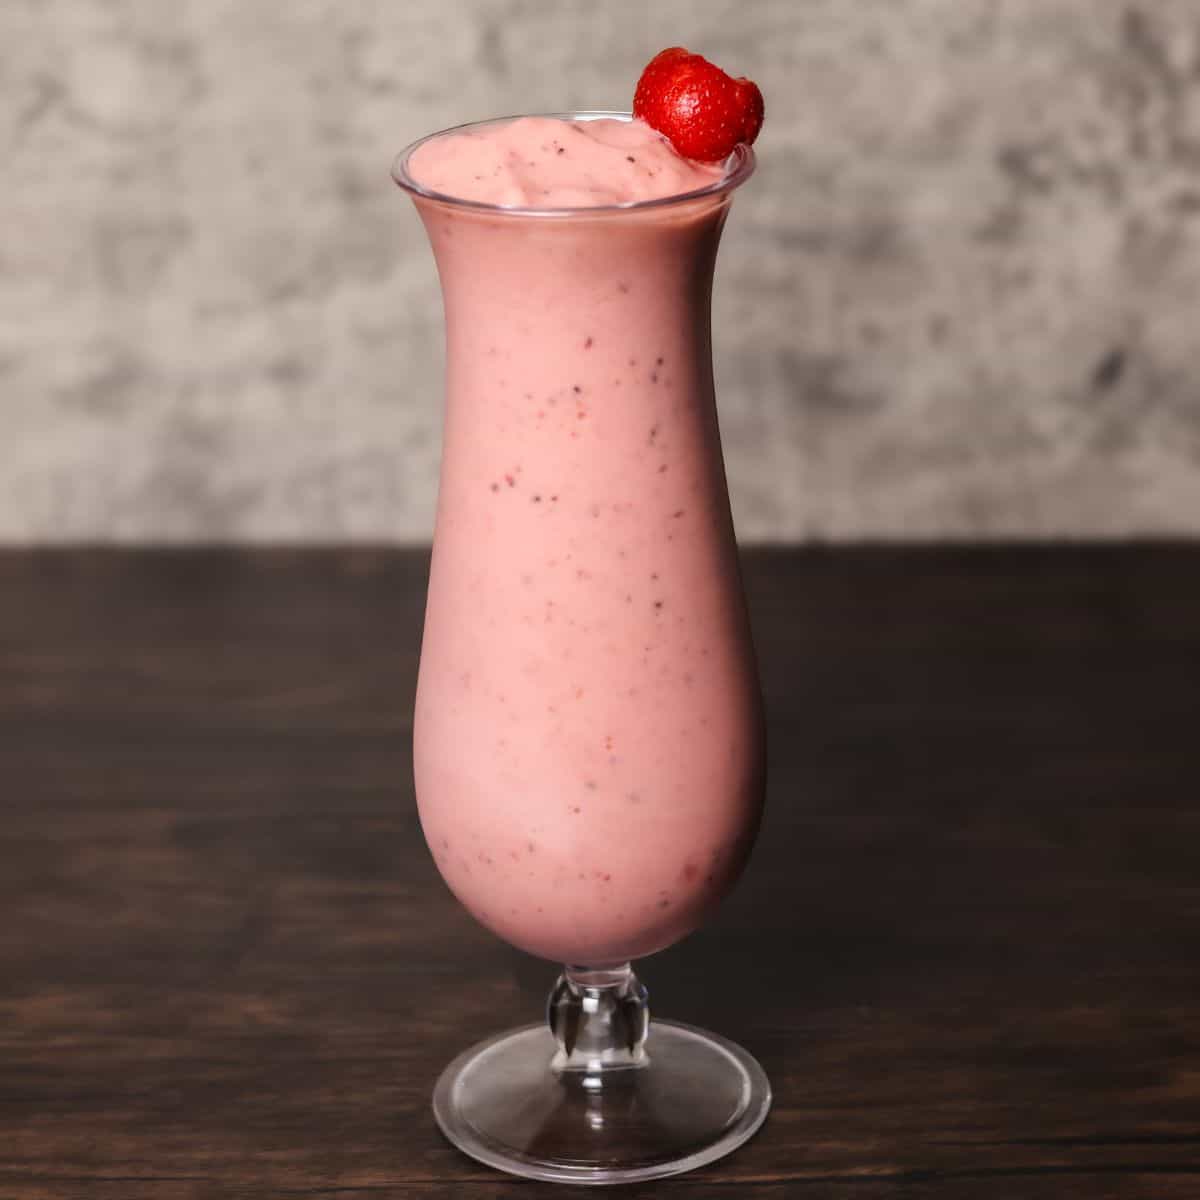 A well-blended kiwi quencher smoothie in a tall glass with a strawberry garnish, presented on a rust